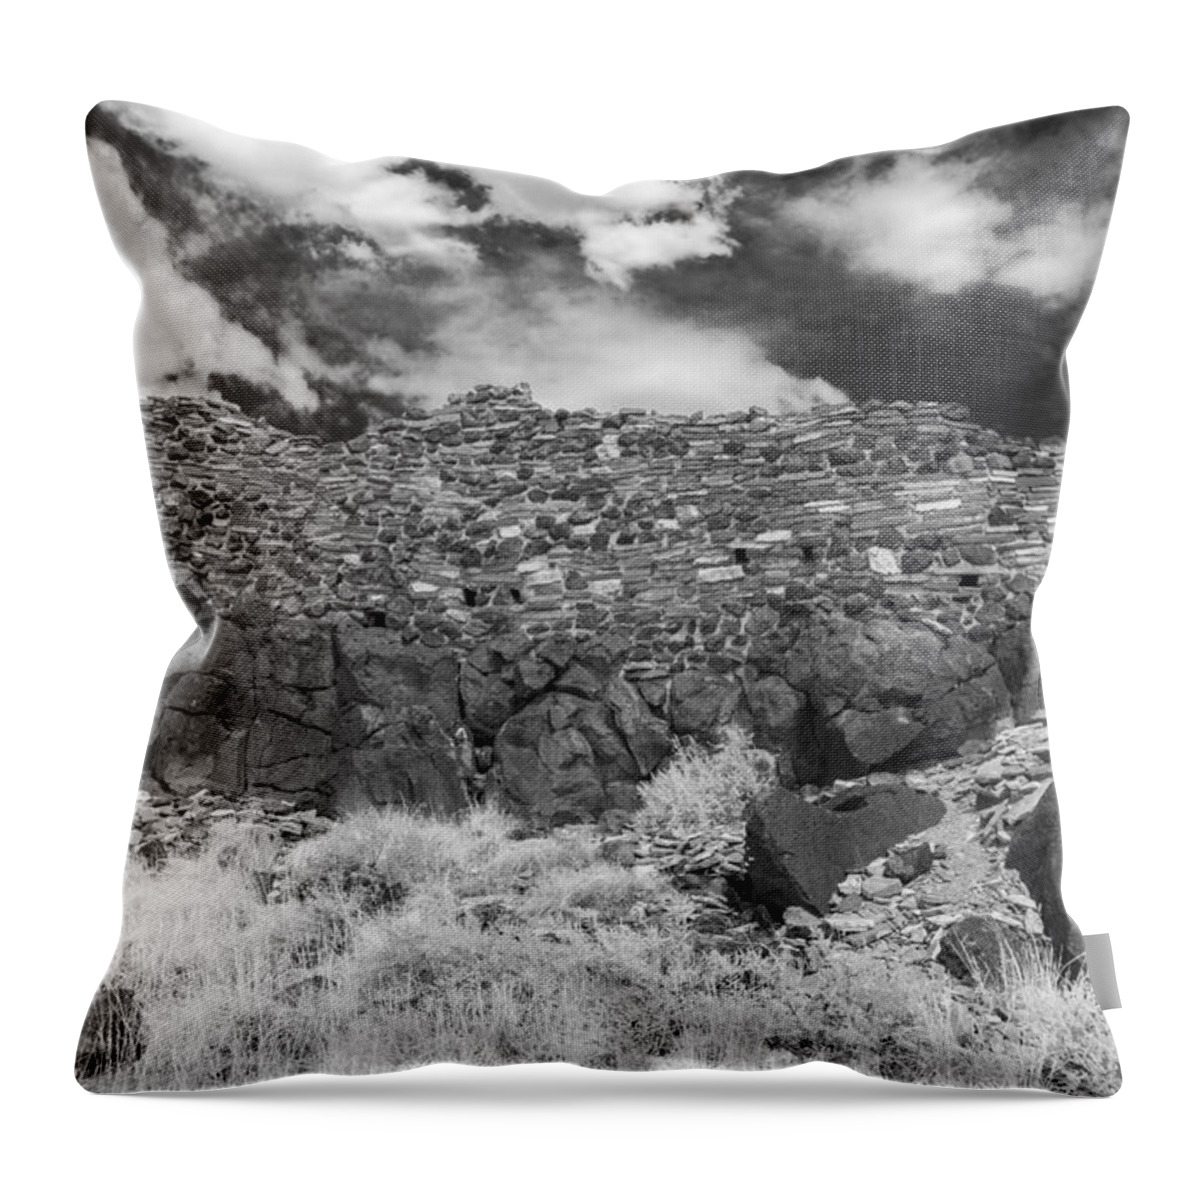 Flagstaff Throw Pillow featuring the photograph Citadel Pueblo West Wall by Chris Bordeleau